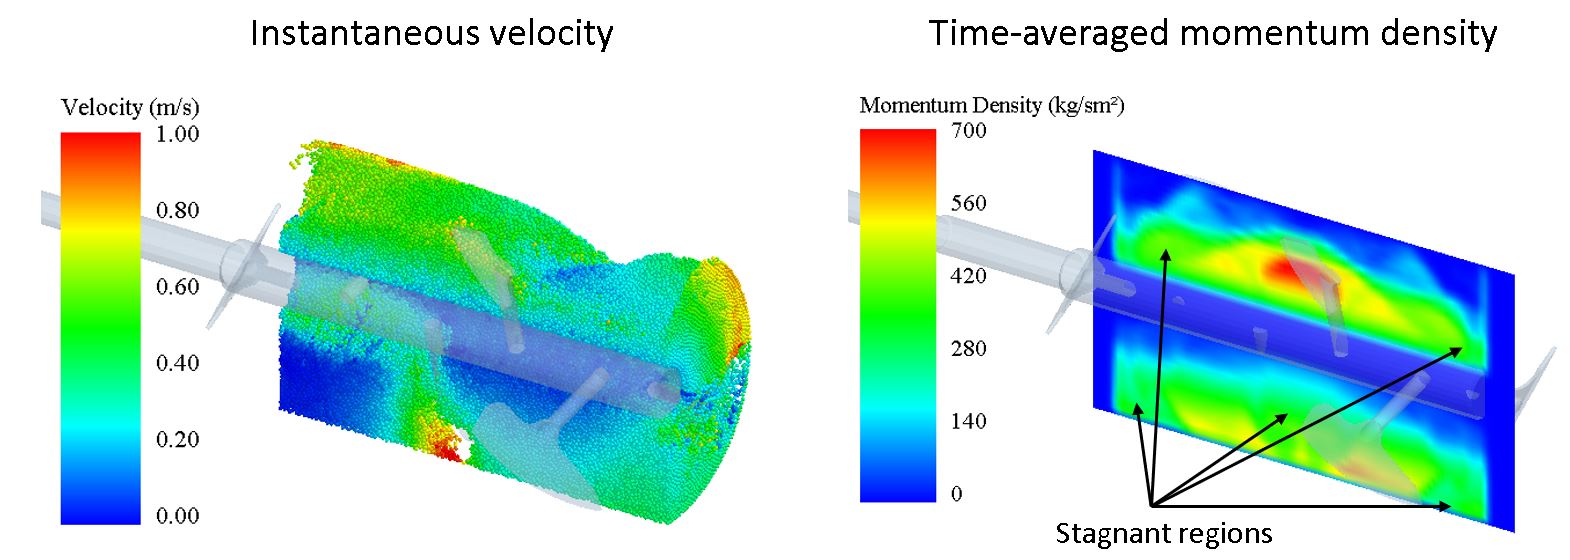 Instantaneous particle velocity and time-averaged momentum density field in a paddle mixer